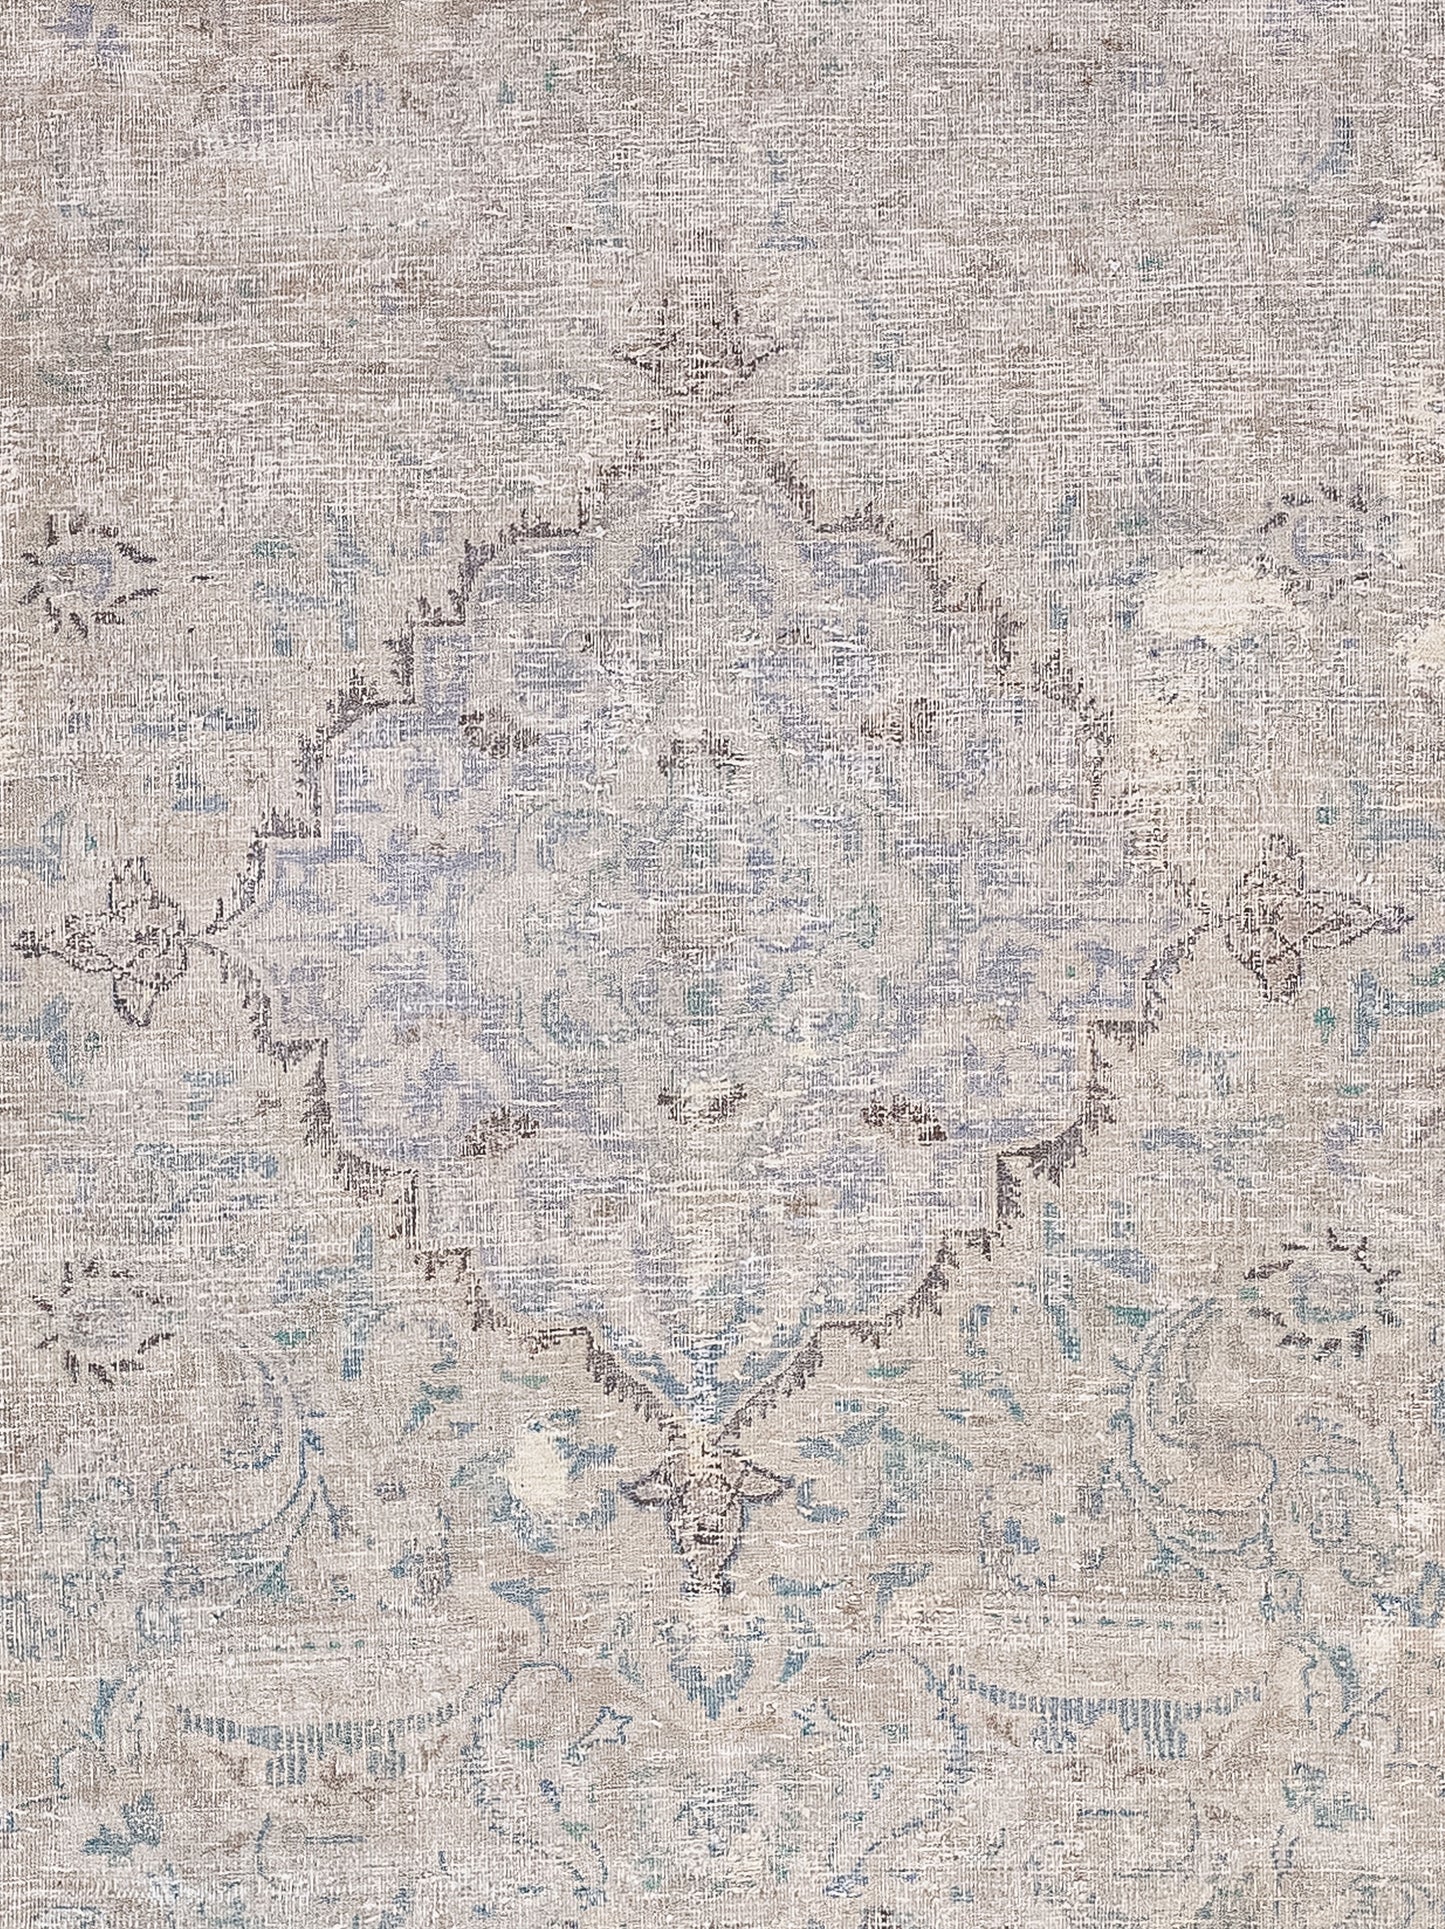 The foreground of the rug features a diamond-shaped ornament filled with symmetrical trims. 